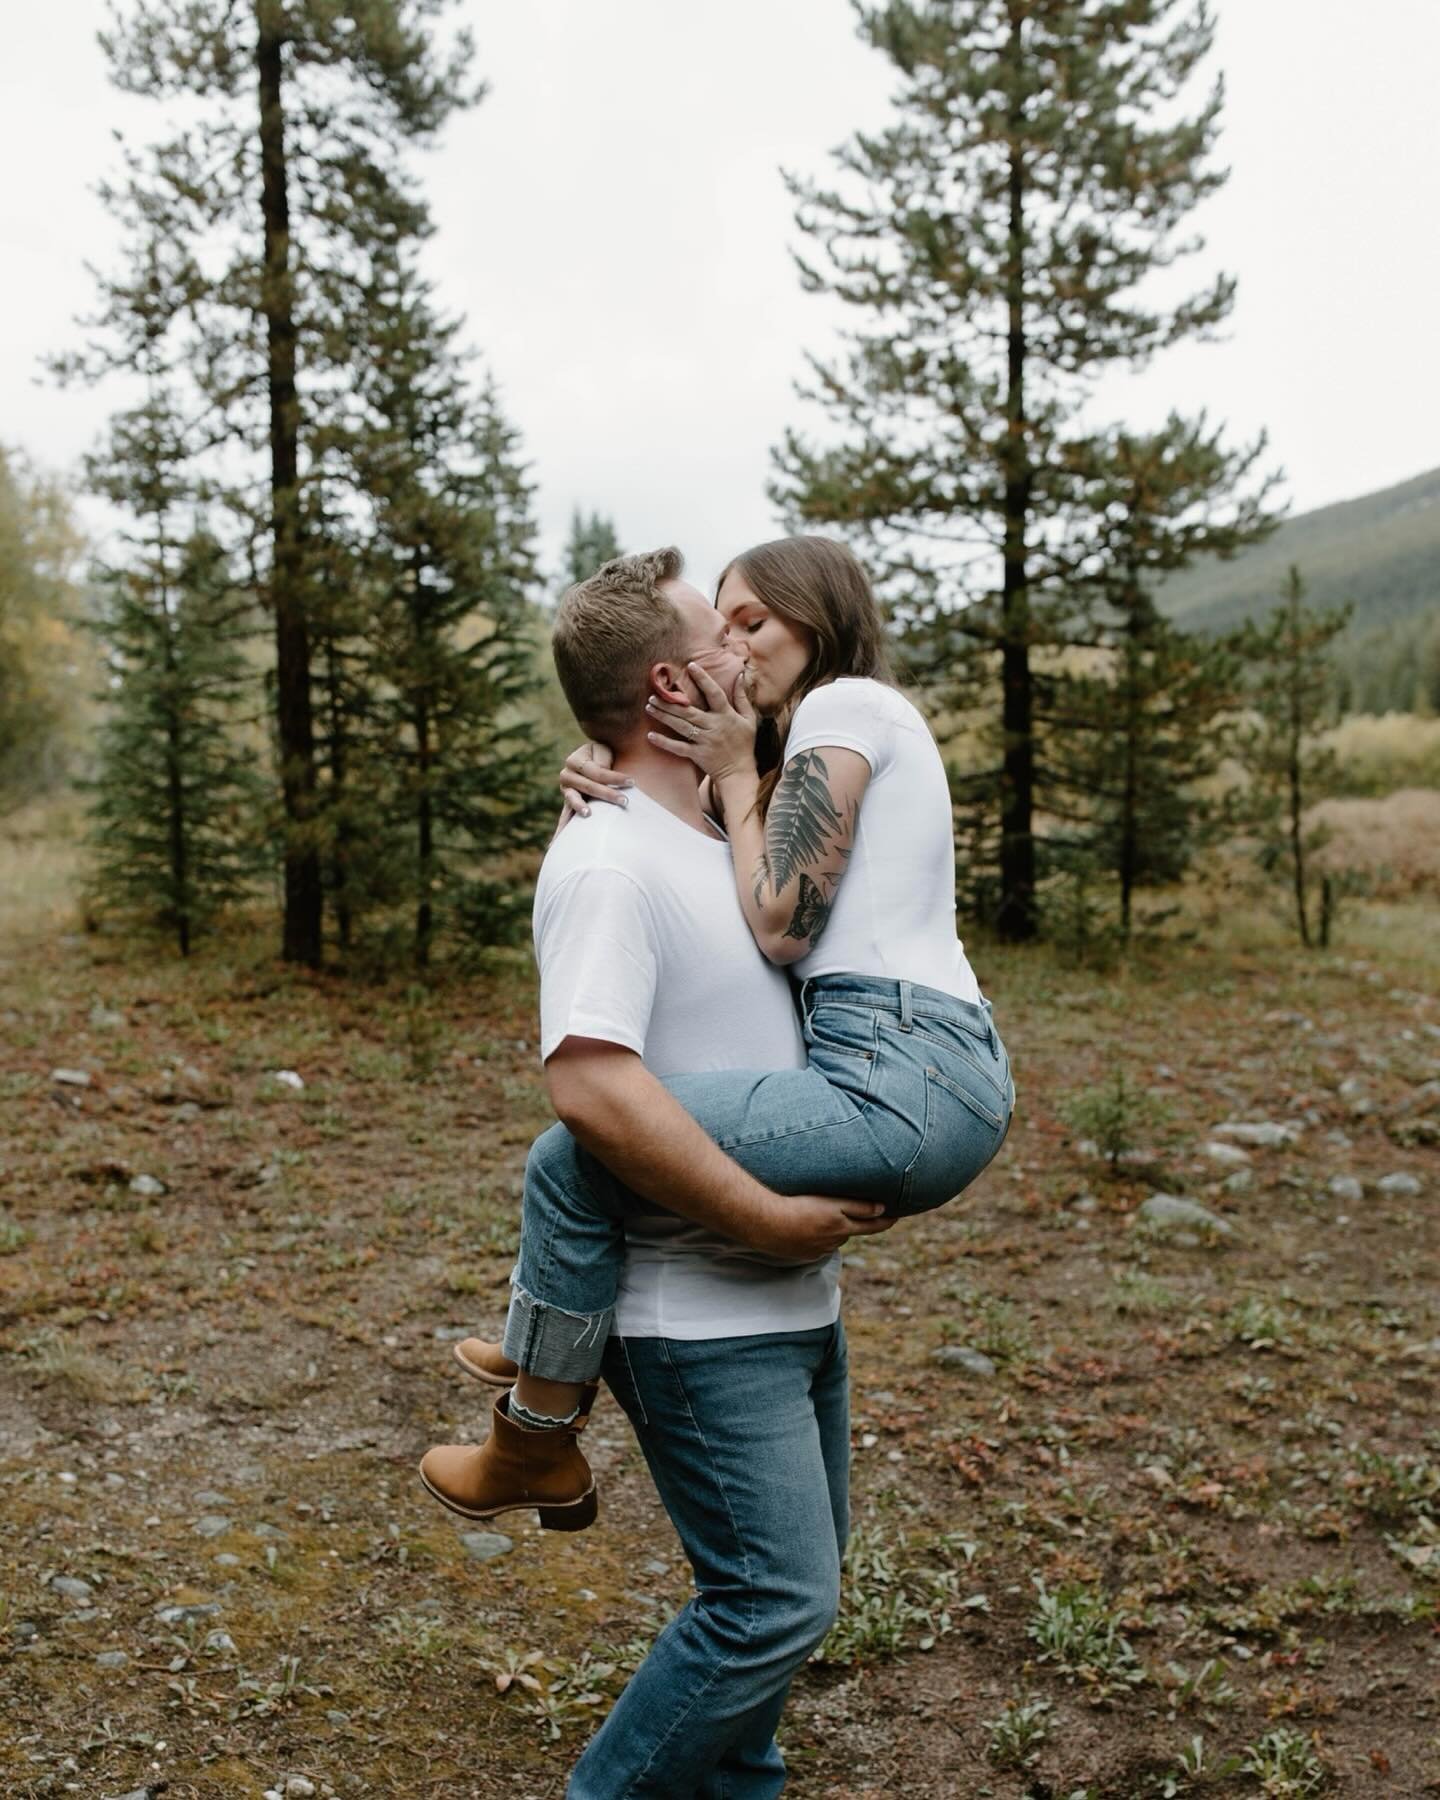 Austin + Amanda picked a dreamy forest location in Breckenridge for their engagements last September! We originally were planning on another location when it got snowed out, so we went a little bit down the mountain to find this spot. It&rsquo;s alwa